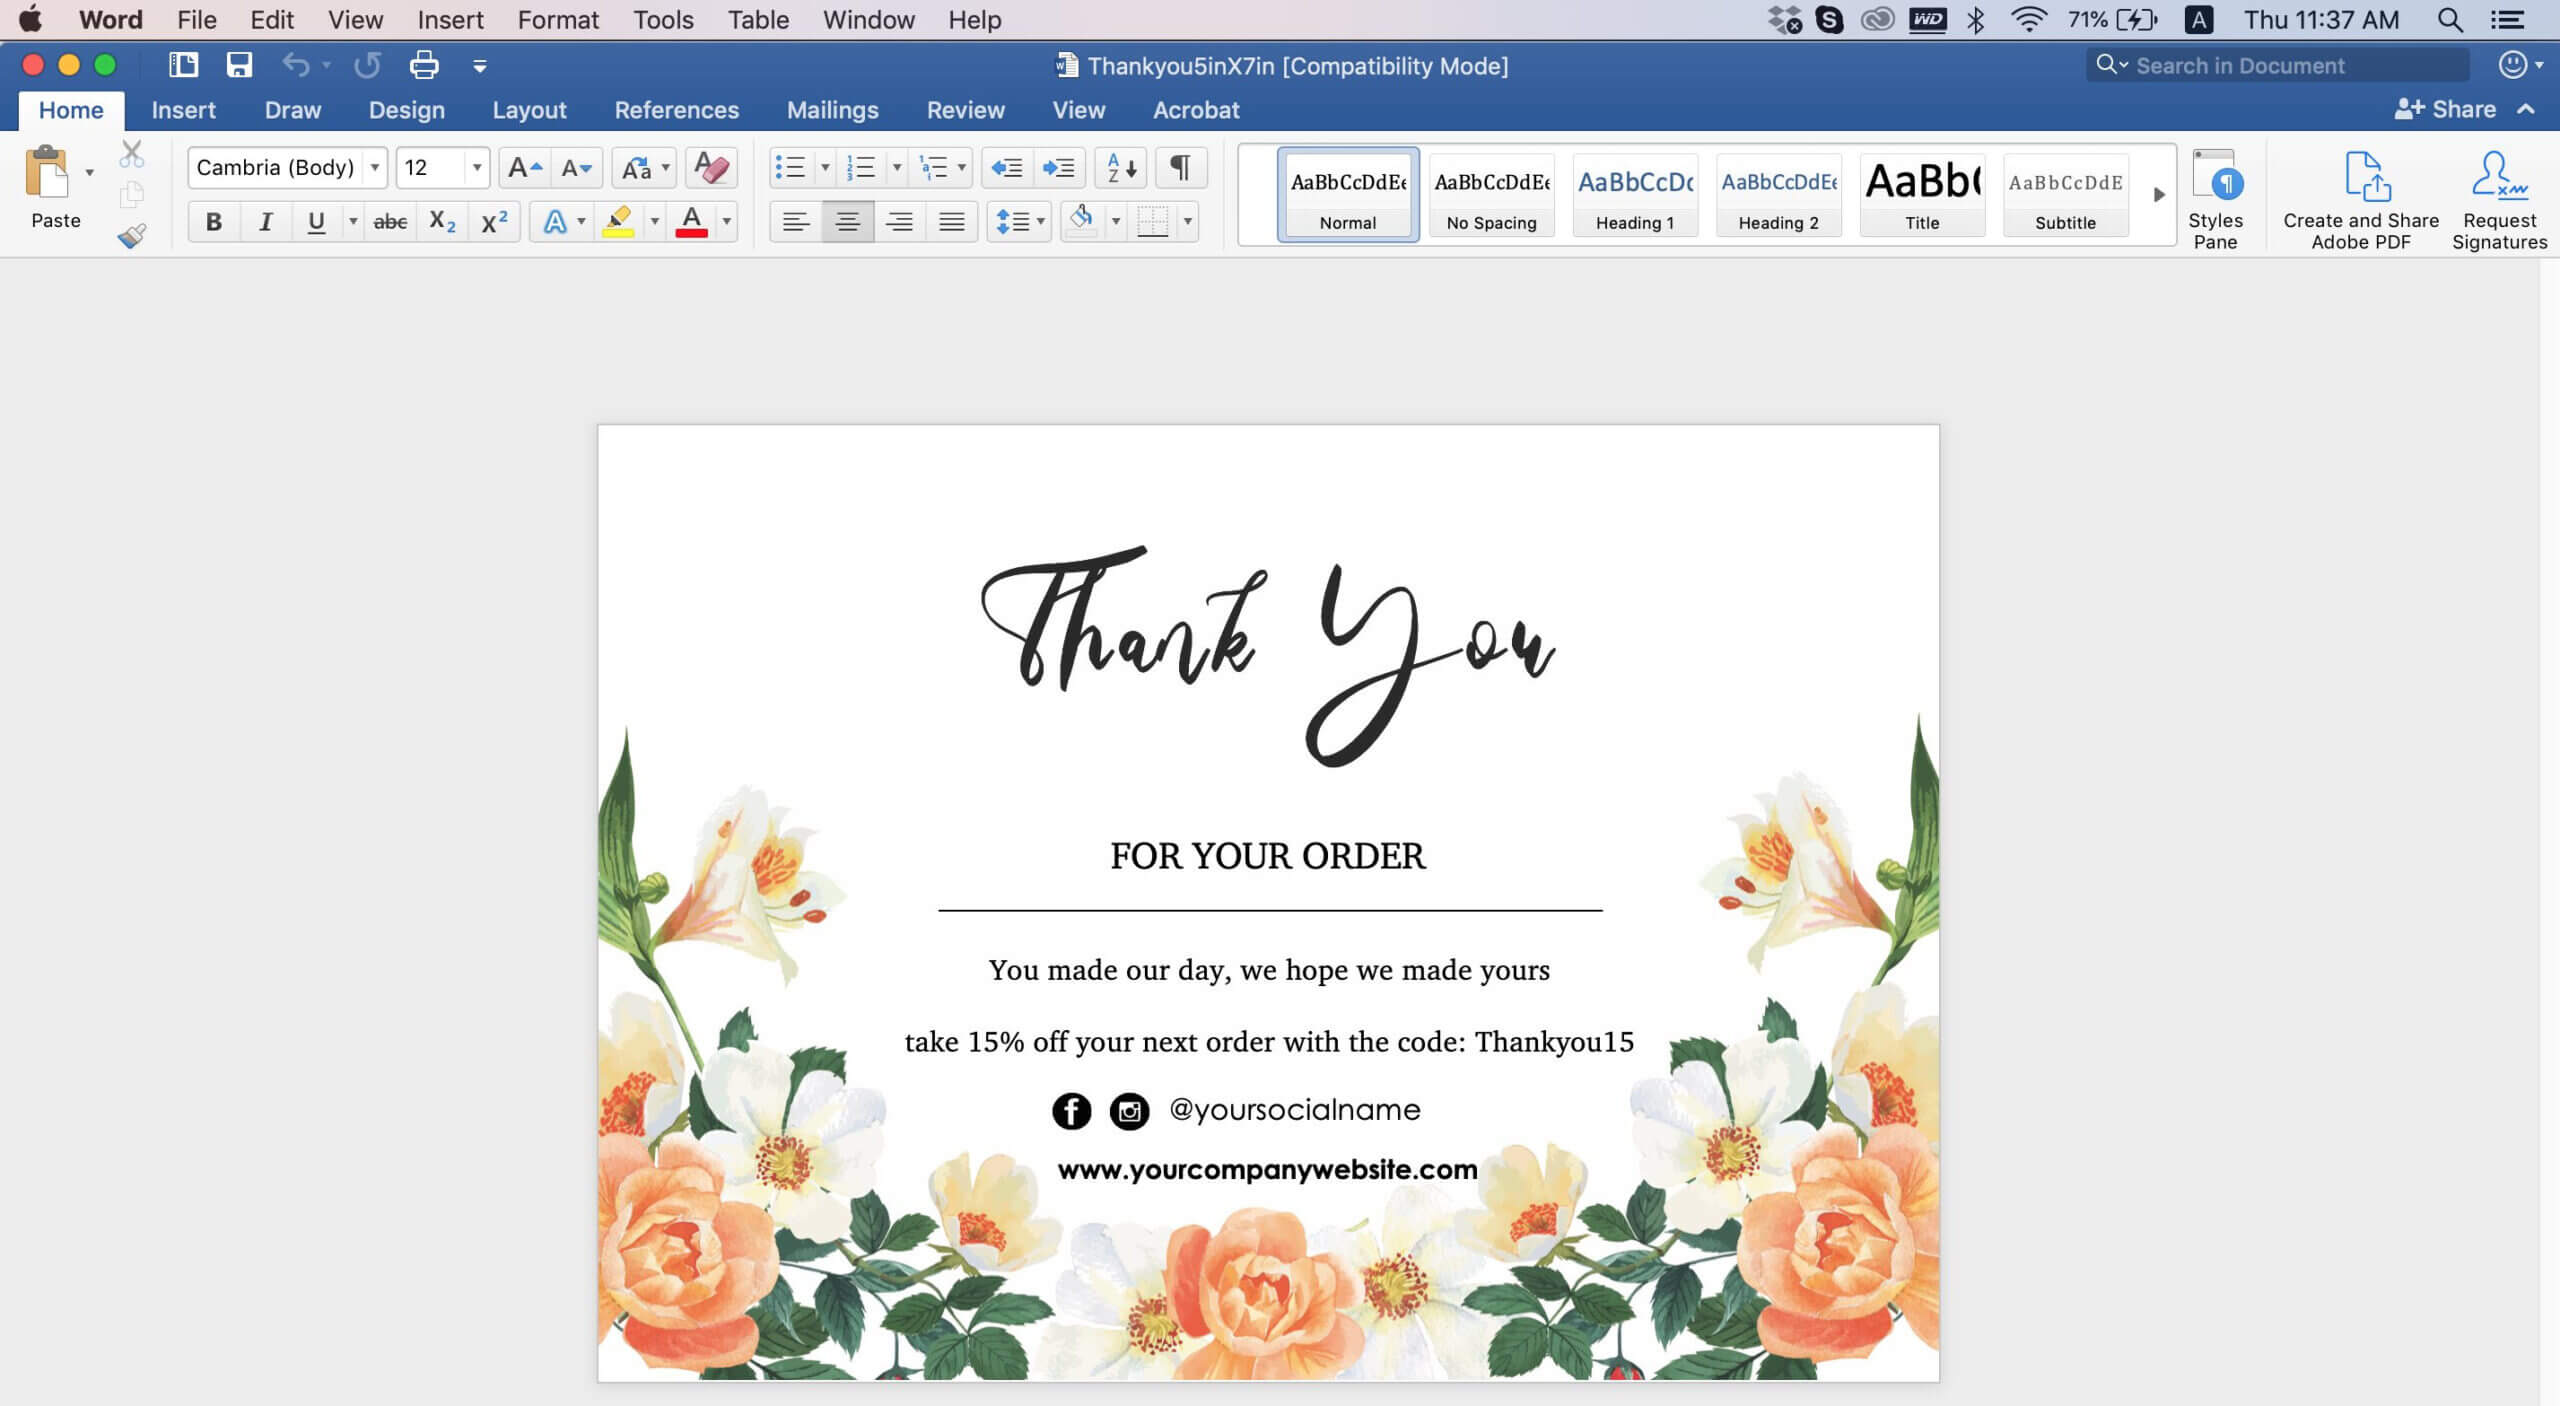 009 Editable Thank You Post Card Template Word Top Ideas For Thank You Card Template Word